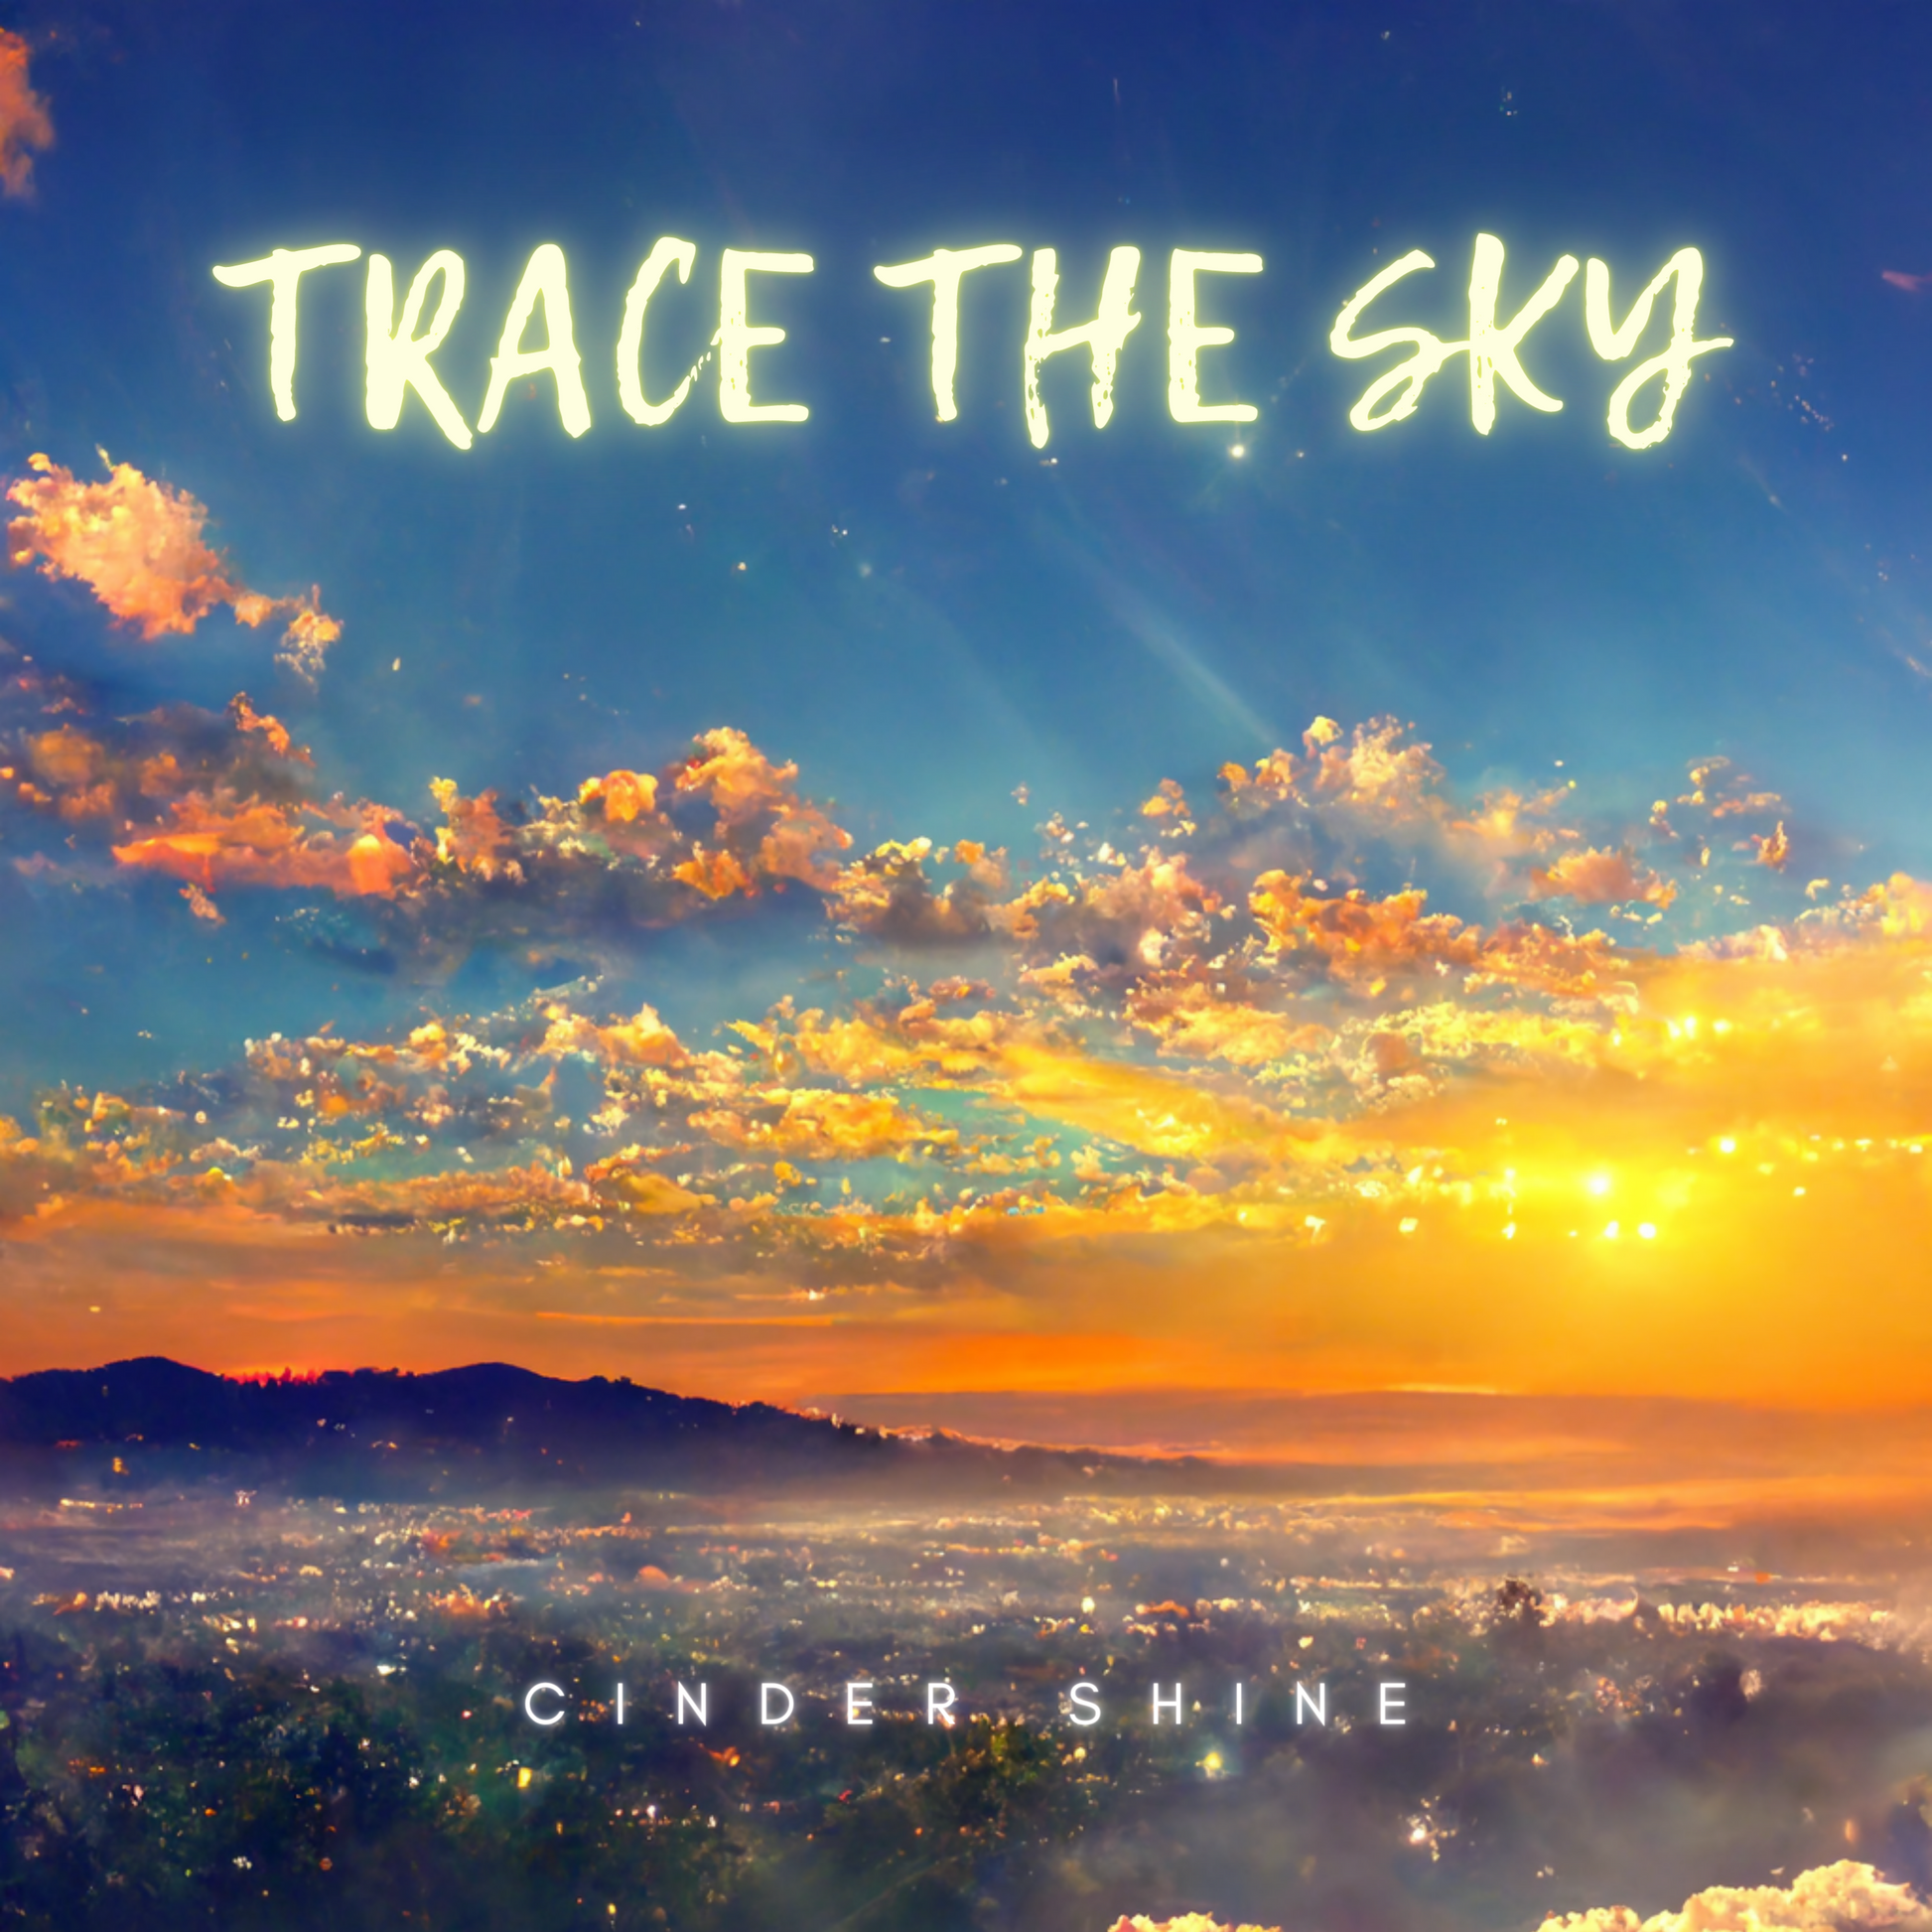 Cancer Can Rock Cinder Shine Trace the Sky Download